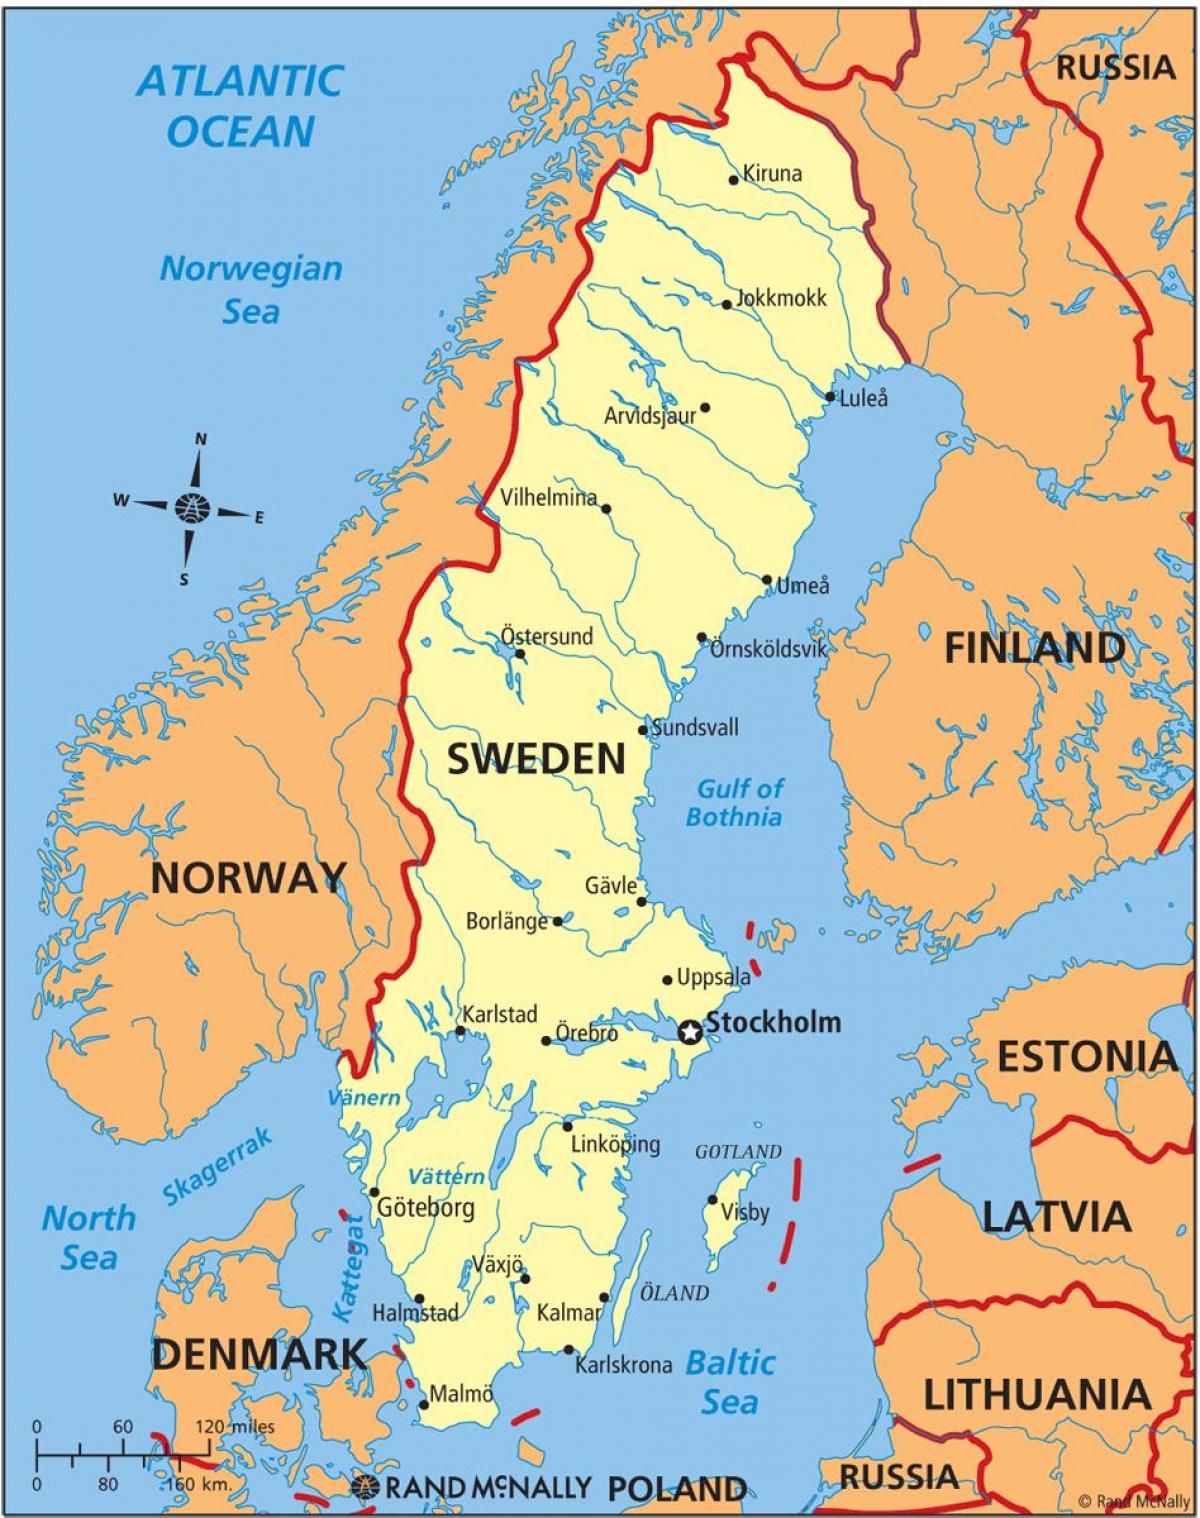 Sweden on a map